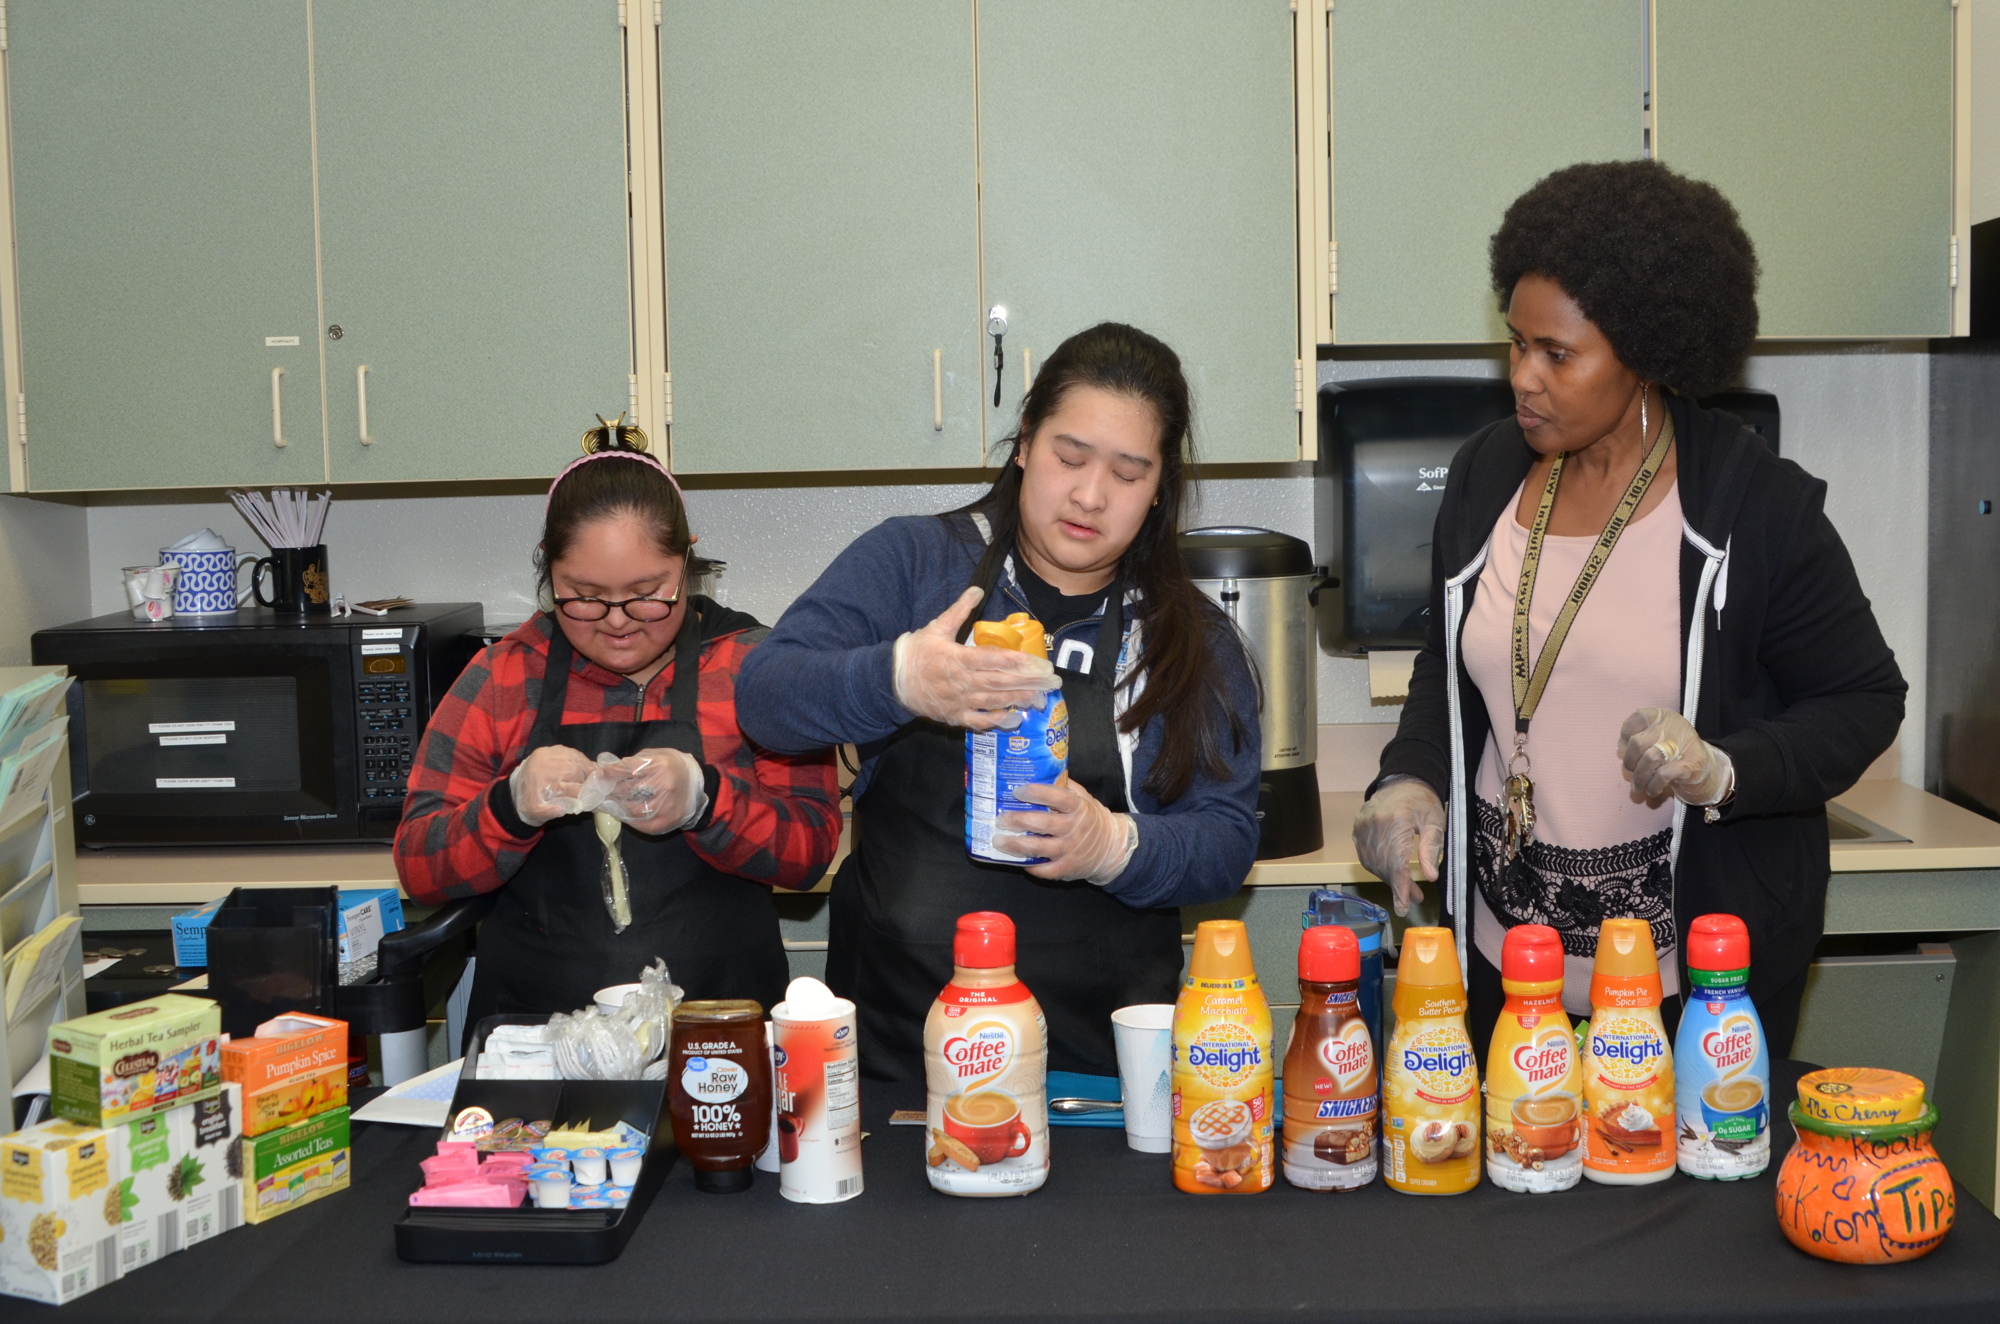 Natalia Barriga-Sanchez, left, with Elizabeth Nguyen, is one of the 10 students who operate the Jump Start Café! at Ocoee High School. Their teacher, Olajumoke Adebimpe, manages the project.